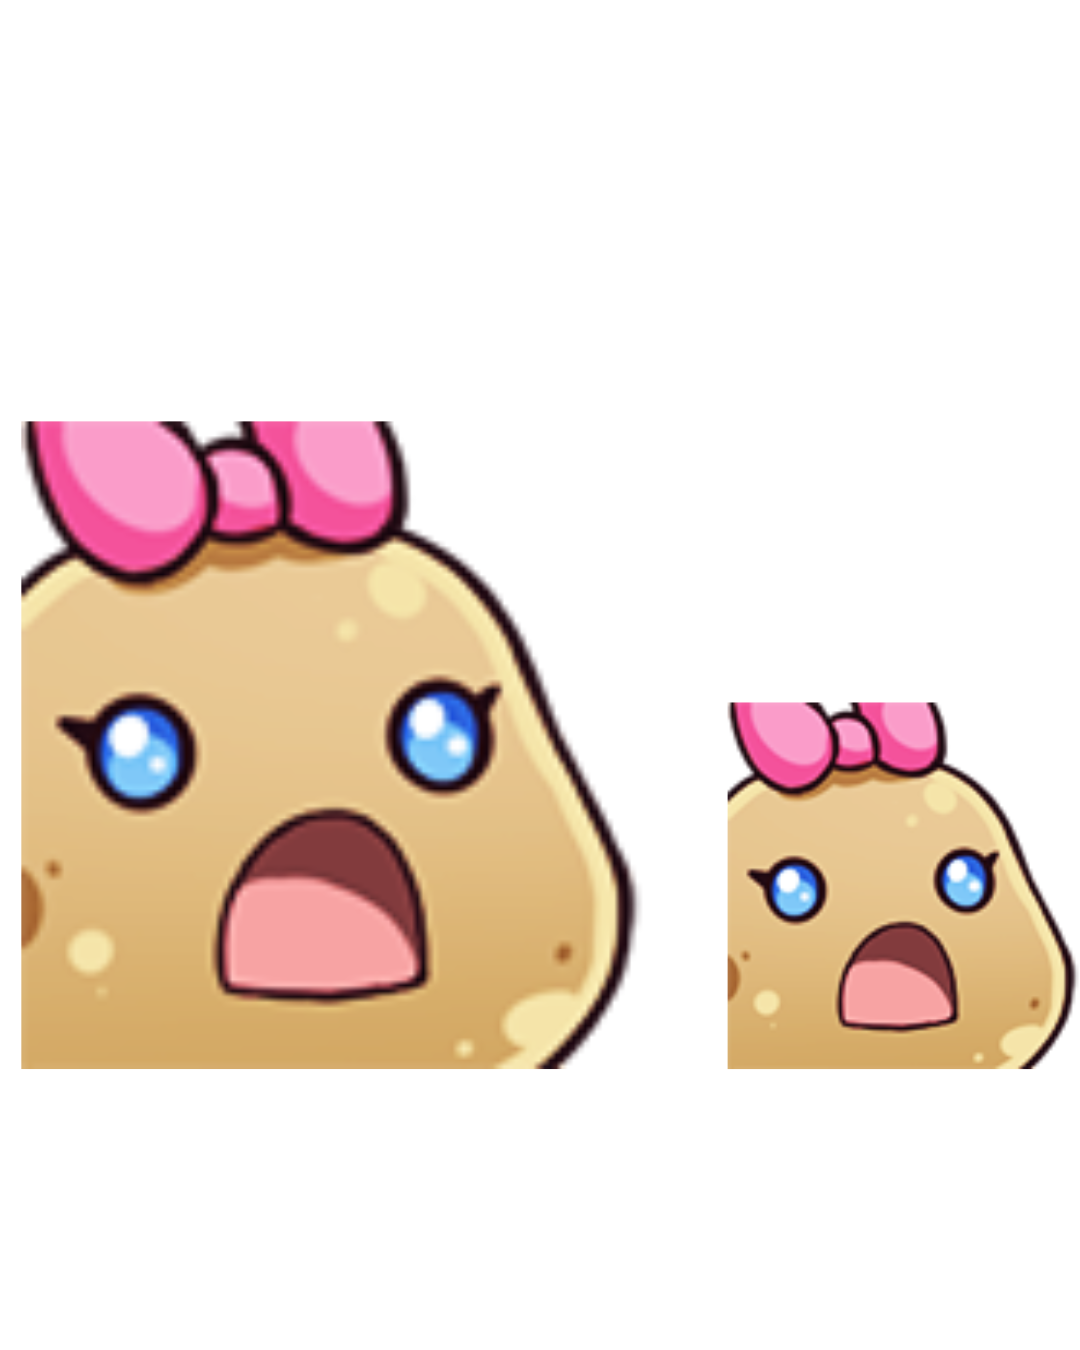 Emmy- Wooden Emote- tatrGasp  **Permanent Collection** (Streamer Purchase)